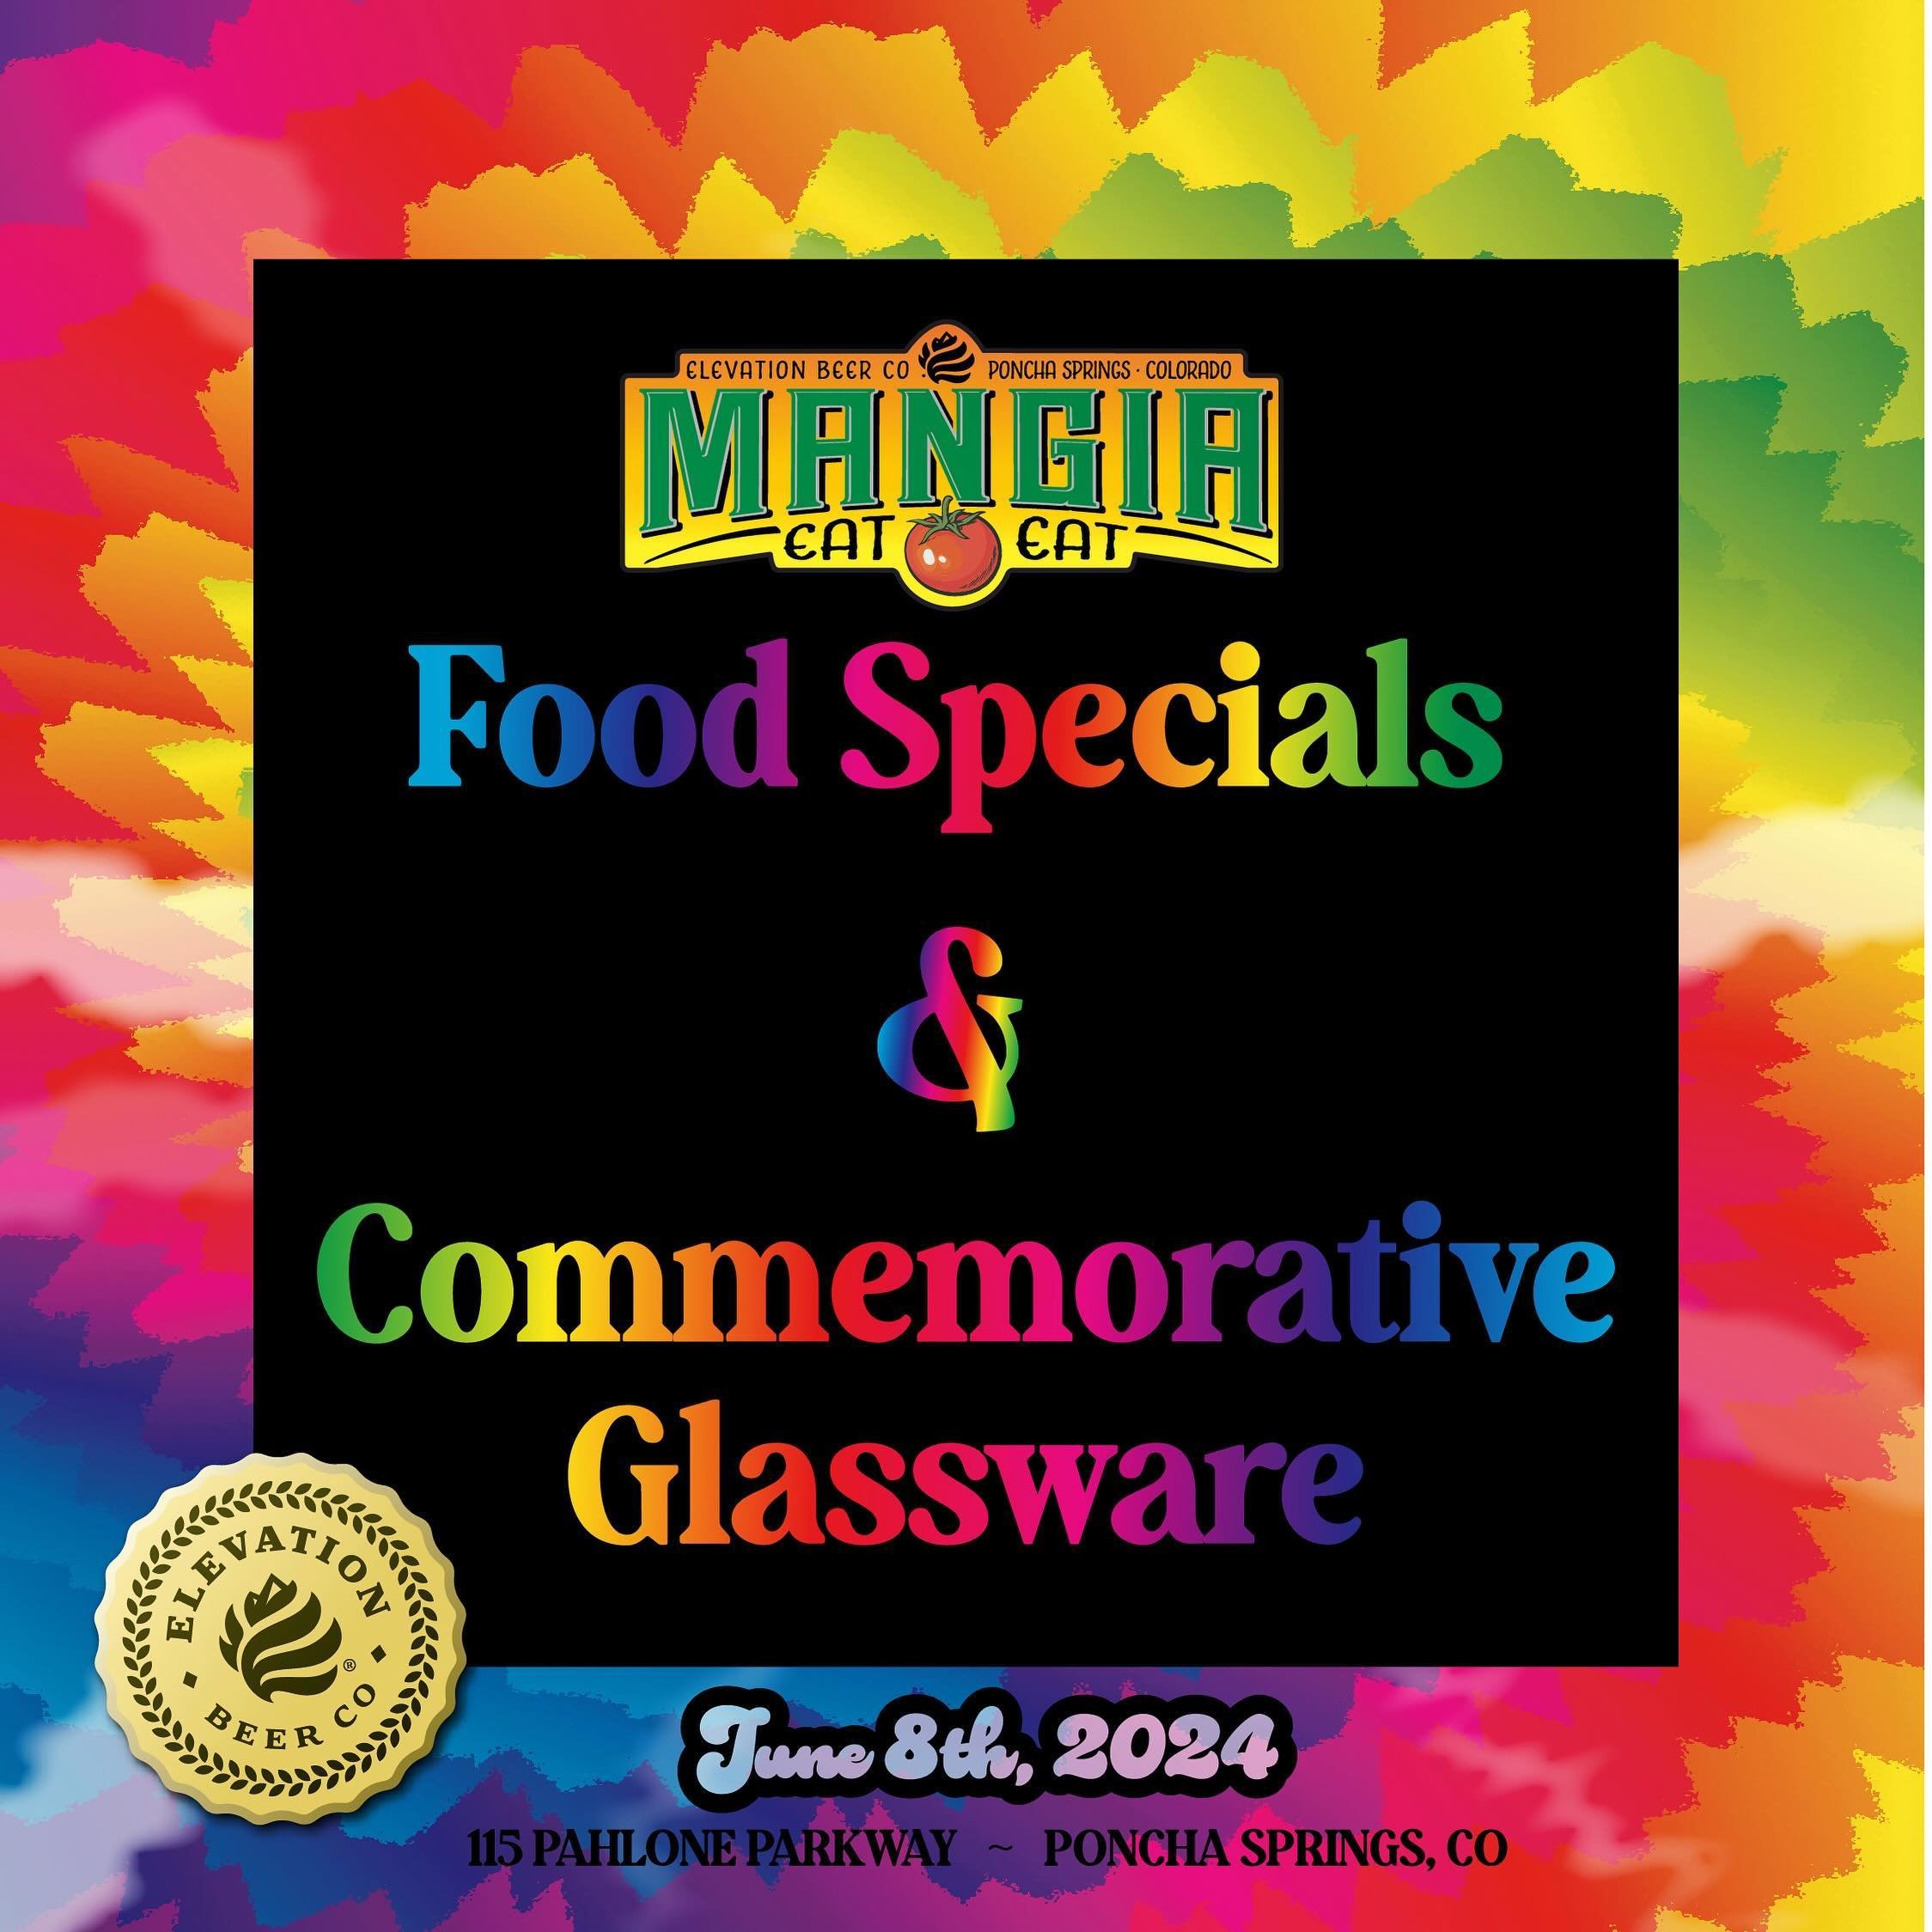 This weekend's food specials are gonna be like Woodstock for your belly! Mangia Food Truck will be servin' up some primo pretzel bites, chicken and steak wraps, elote and more.

Catch a buzz while you're at it with a filled 12th Anniversary commemora